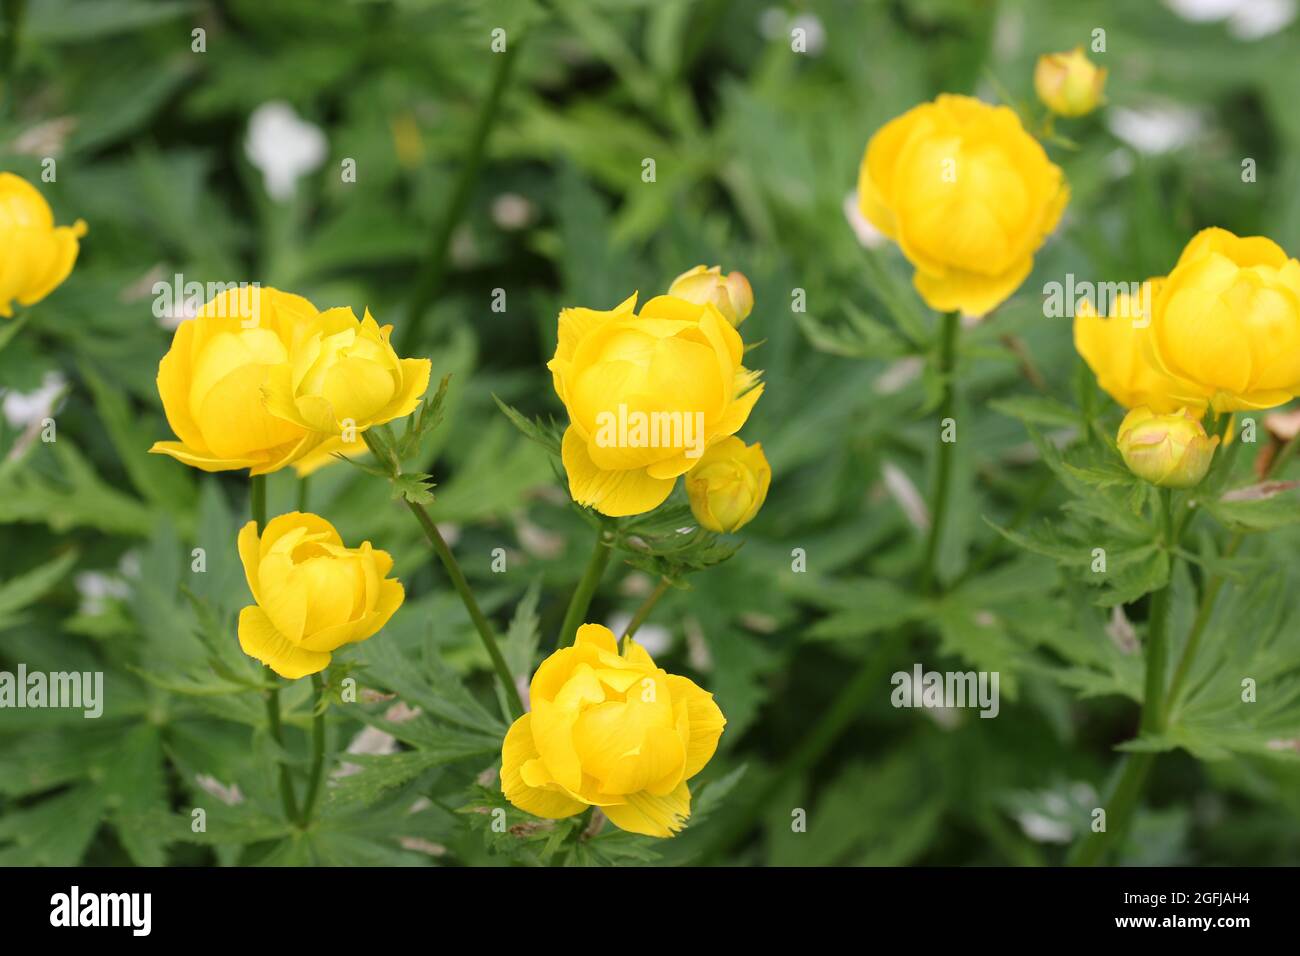 Yellow hybrid globeflower, Trollius x cultorum variety Bressingham Sunshine, flowers with a background of blurred leaves and flowers. Stock Photo